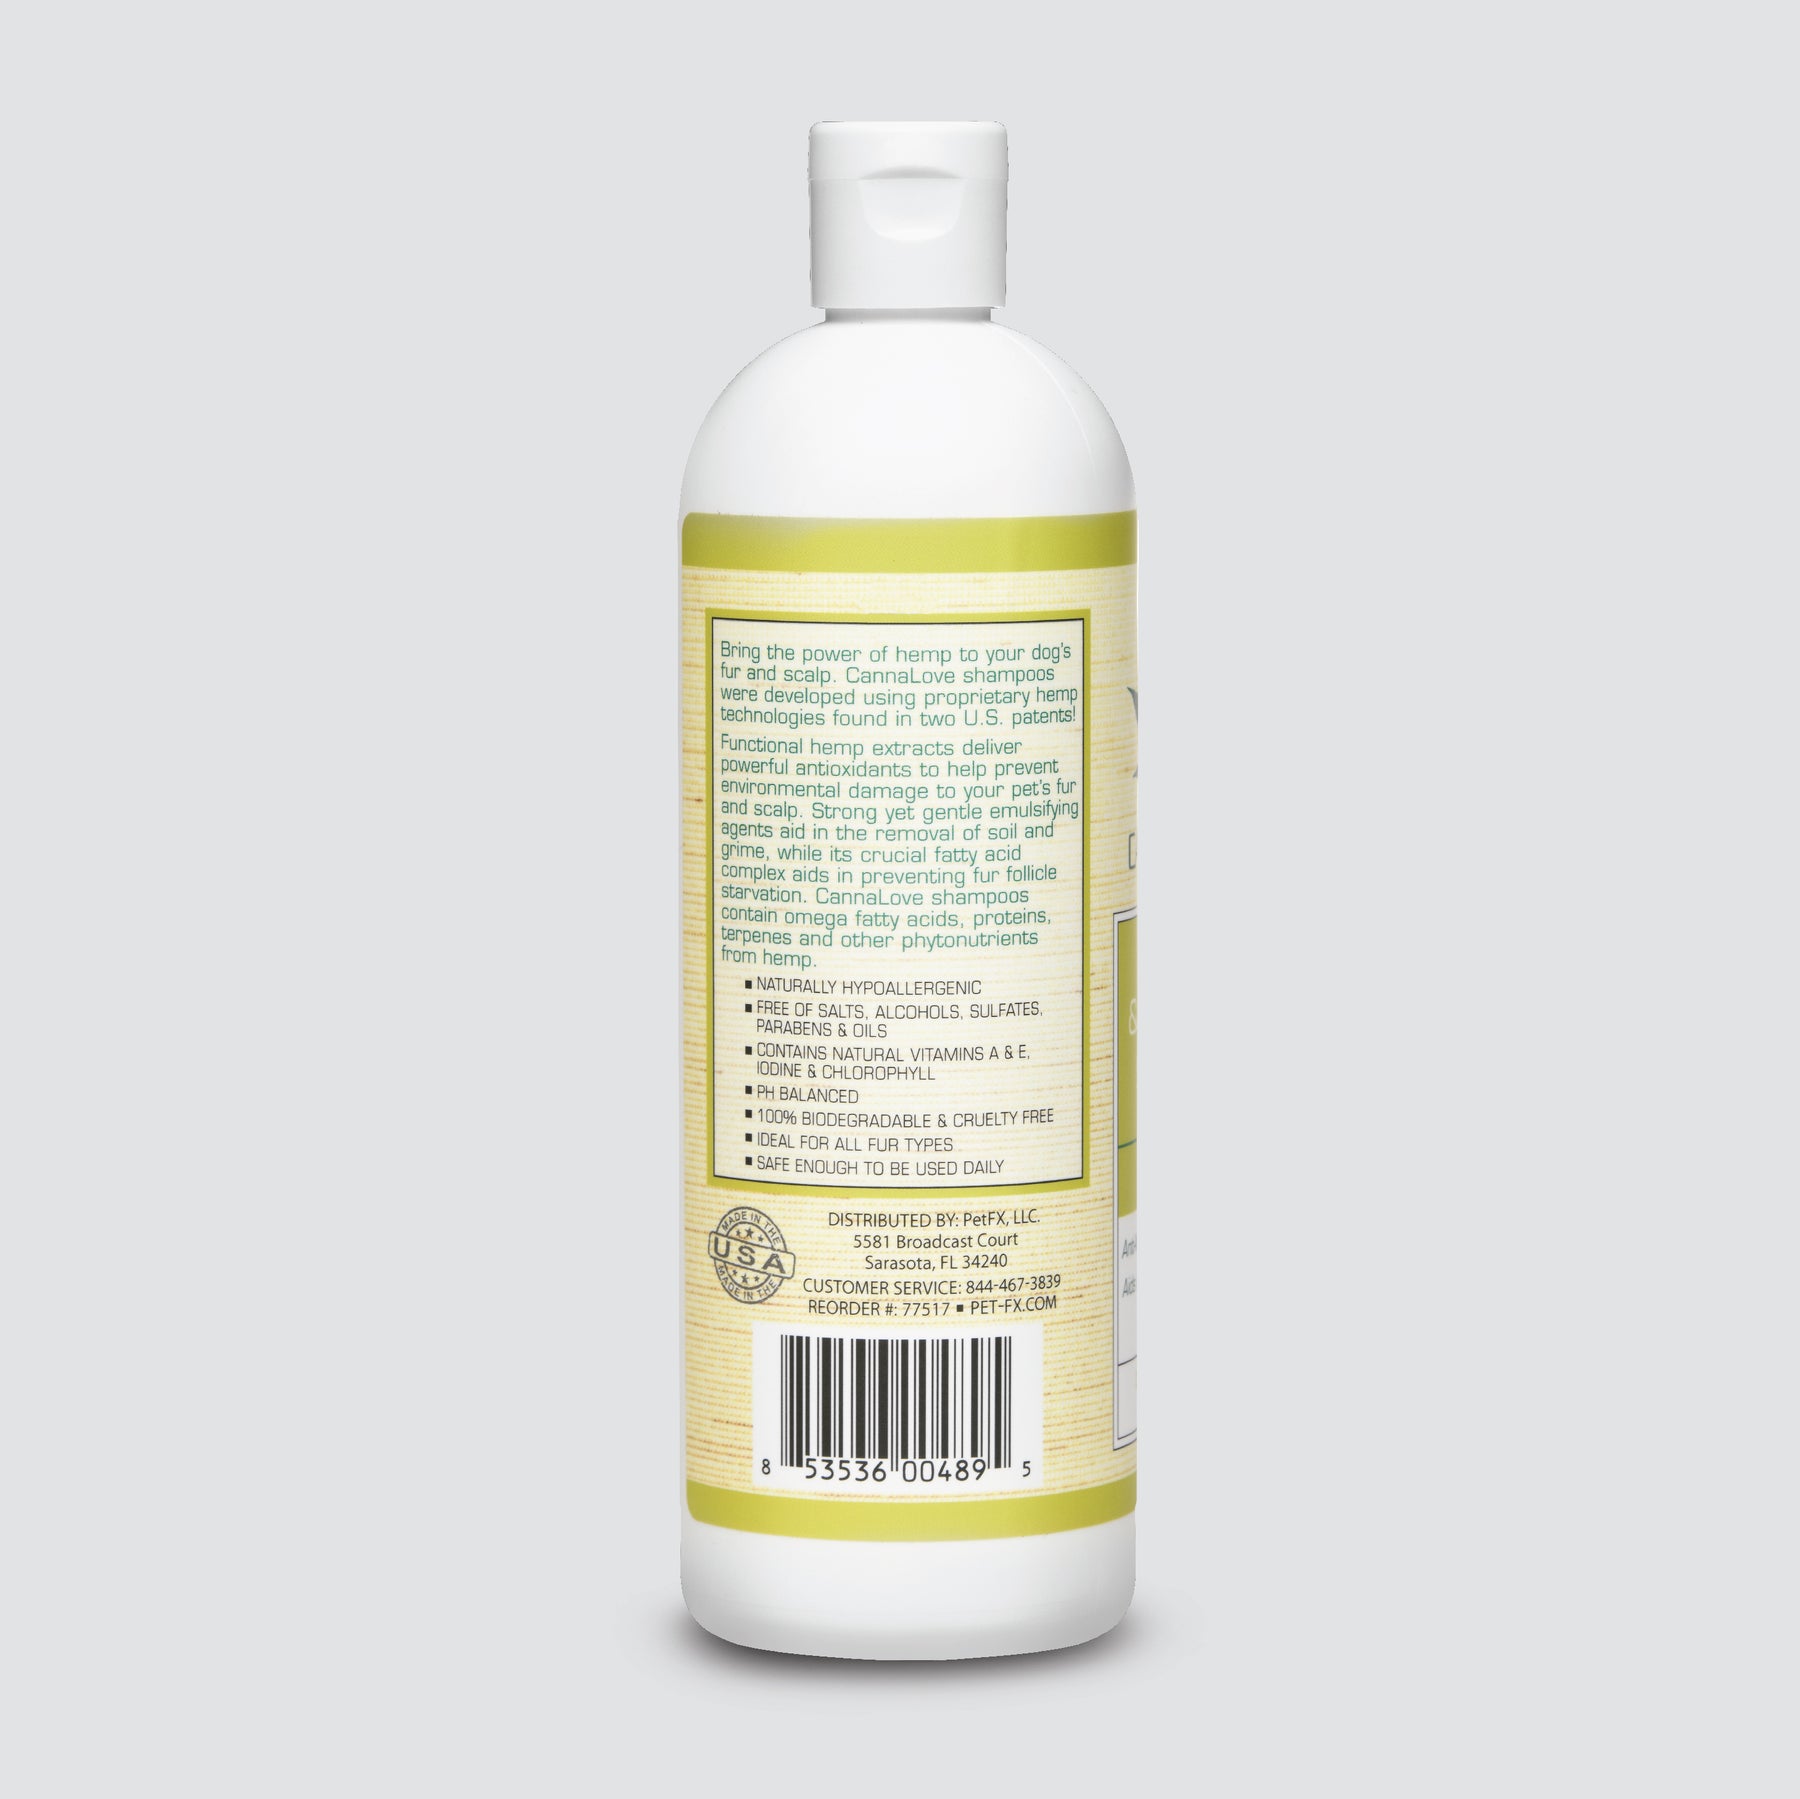 CannaLove Allergy and Itch Relief Shampoo